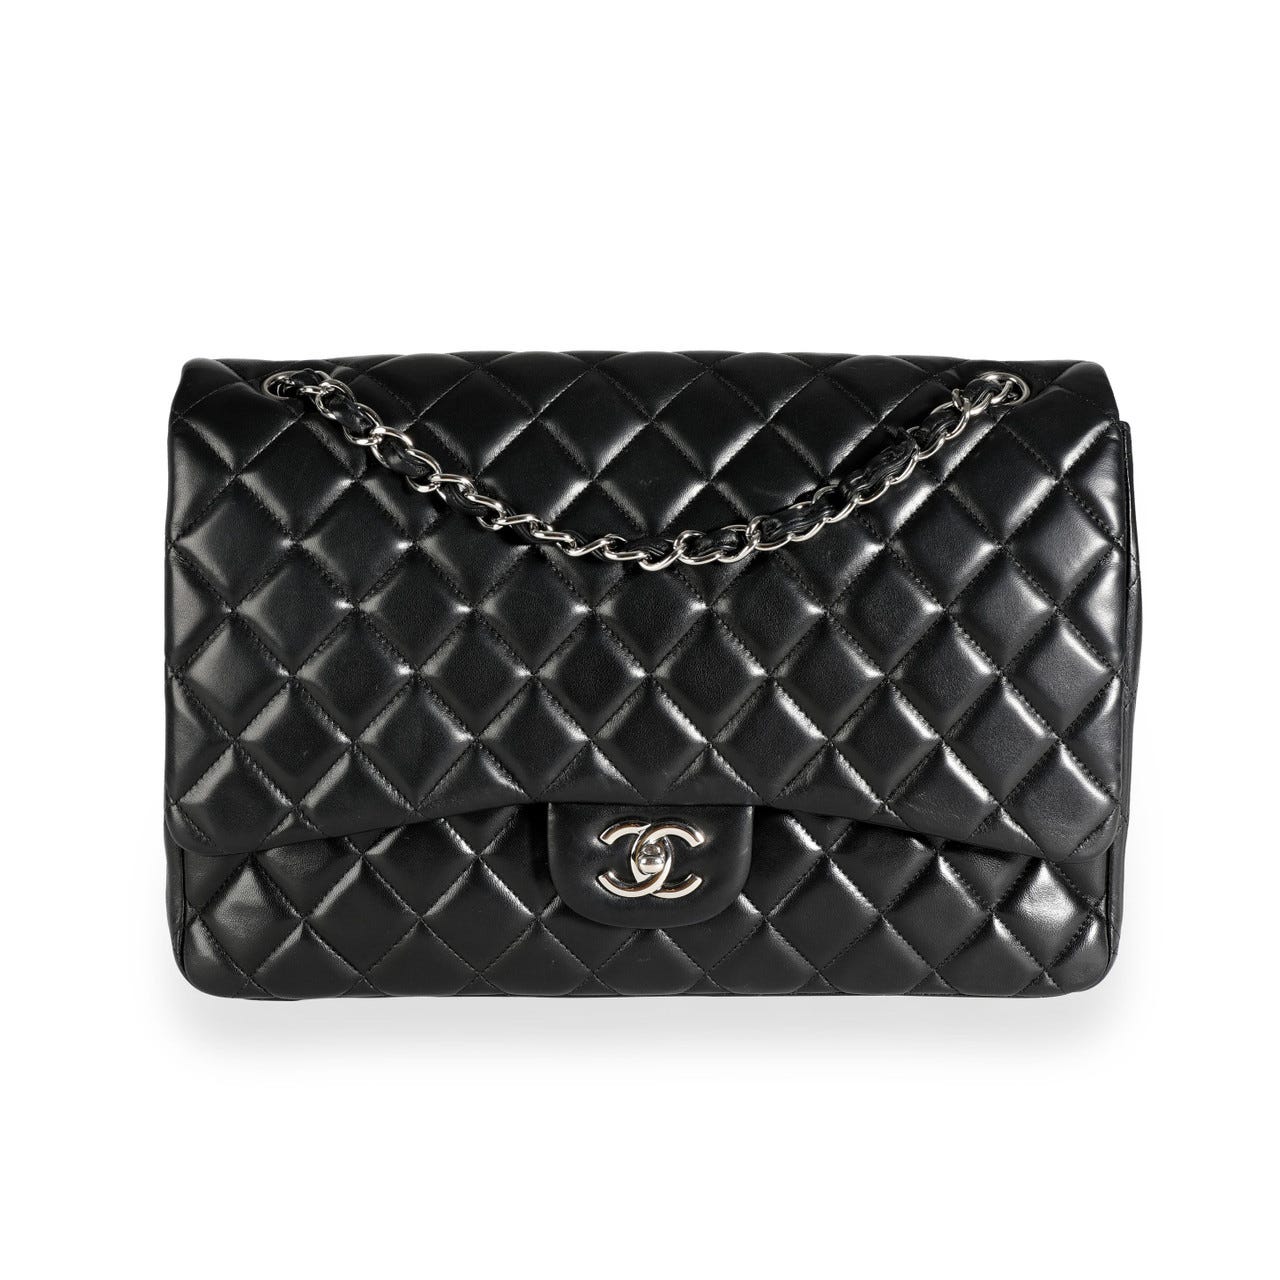 Value My Stuff on X: Are you a fan of @CHANEL bags? #CocoChanel was an  undeniable style genius and her #fashion #accessories are in the #class of  their own. Would you guess